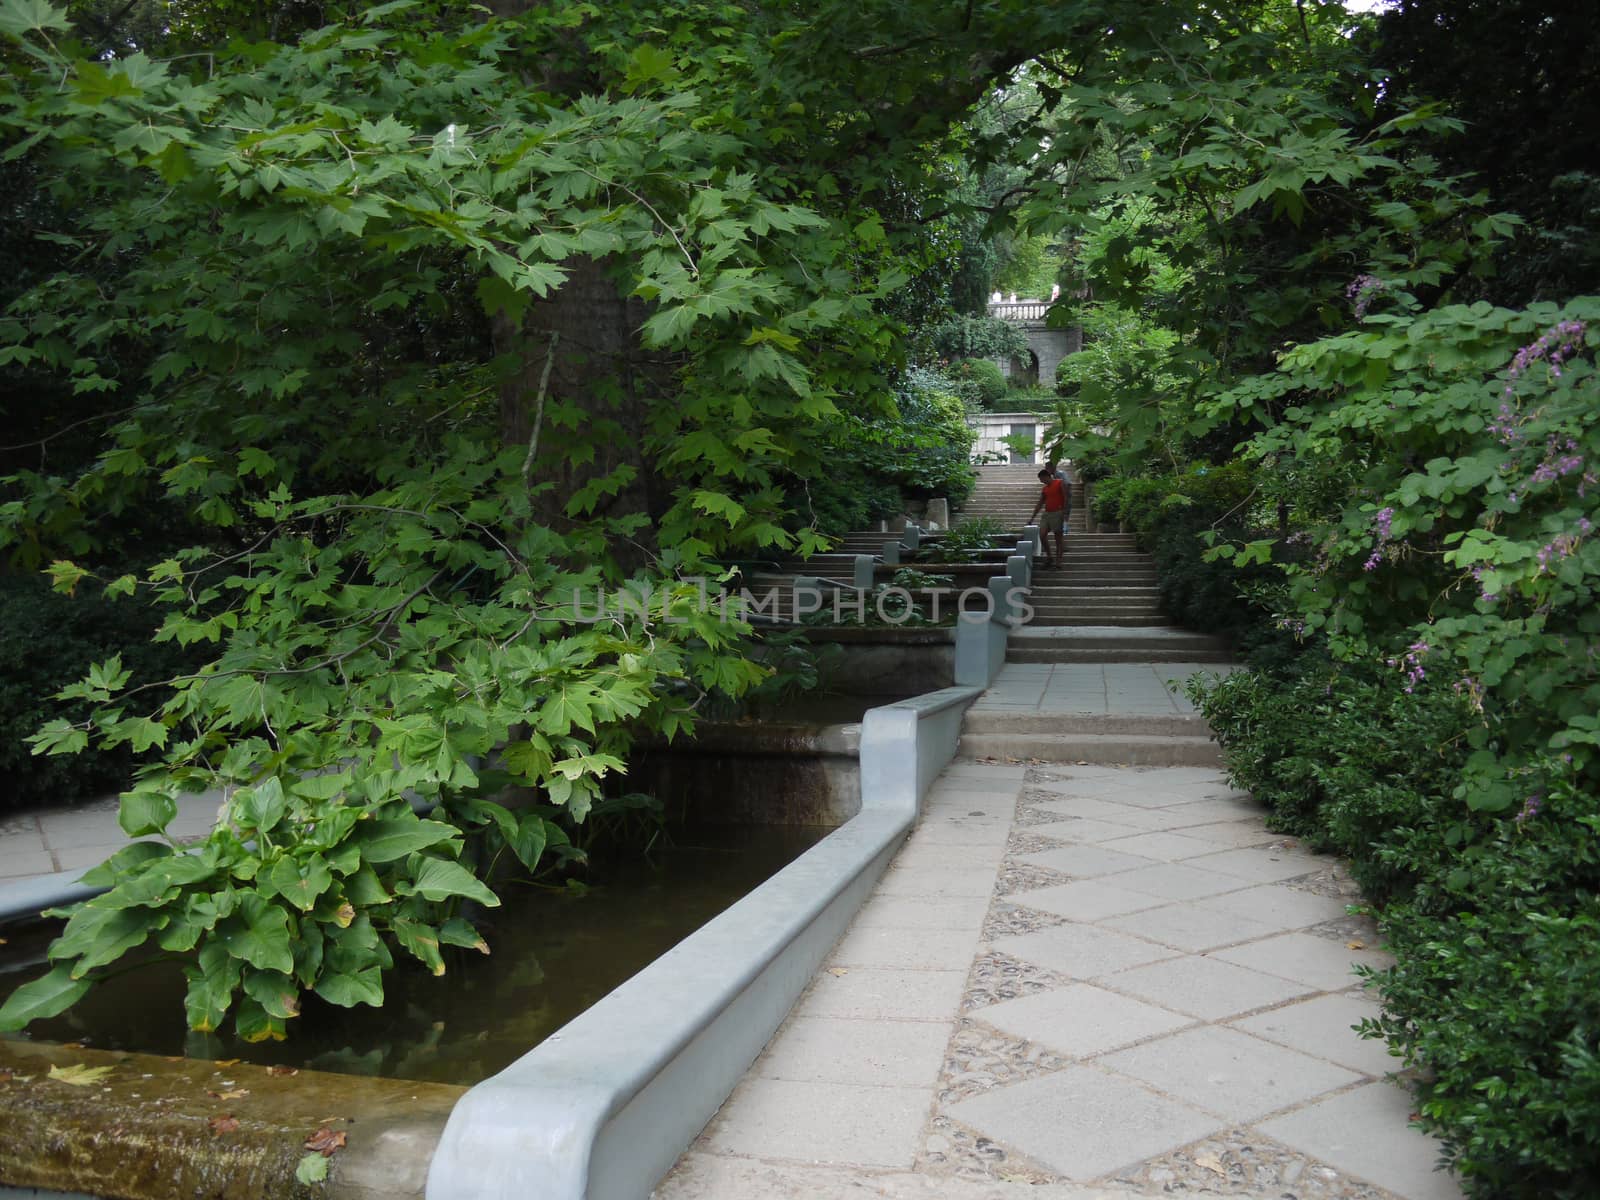 The park with an unusual pond flowing down the stairs. Unusual decision of architects and planners by Adamchuk